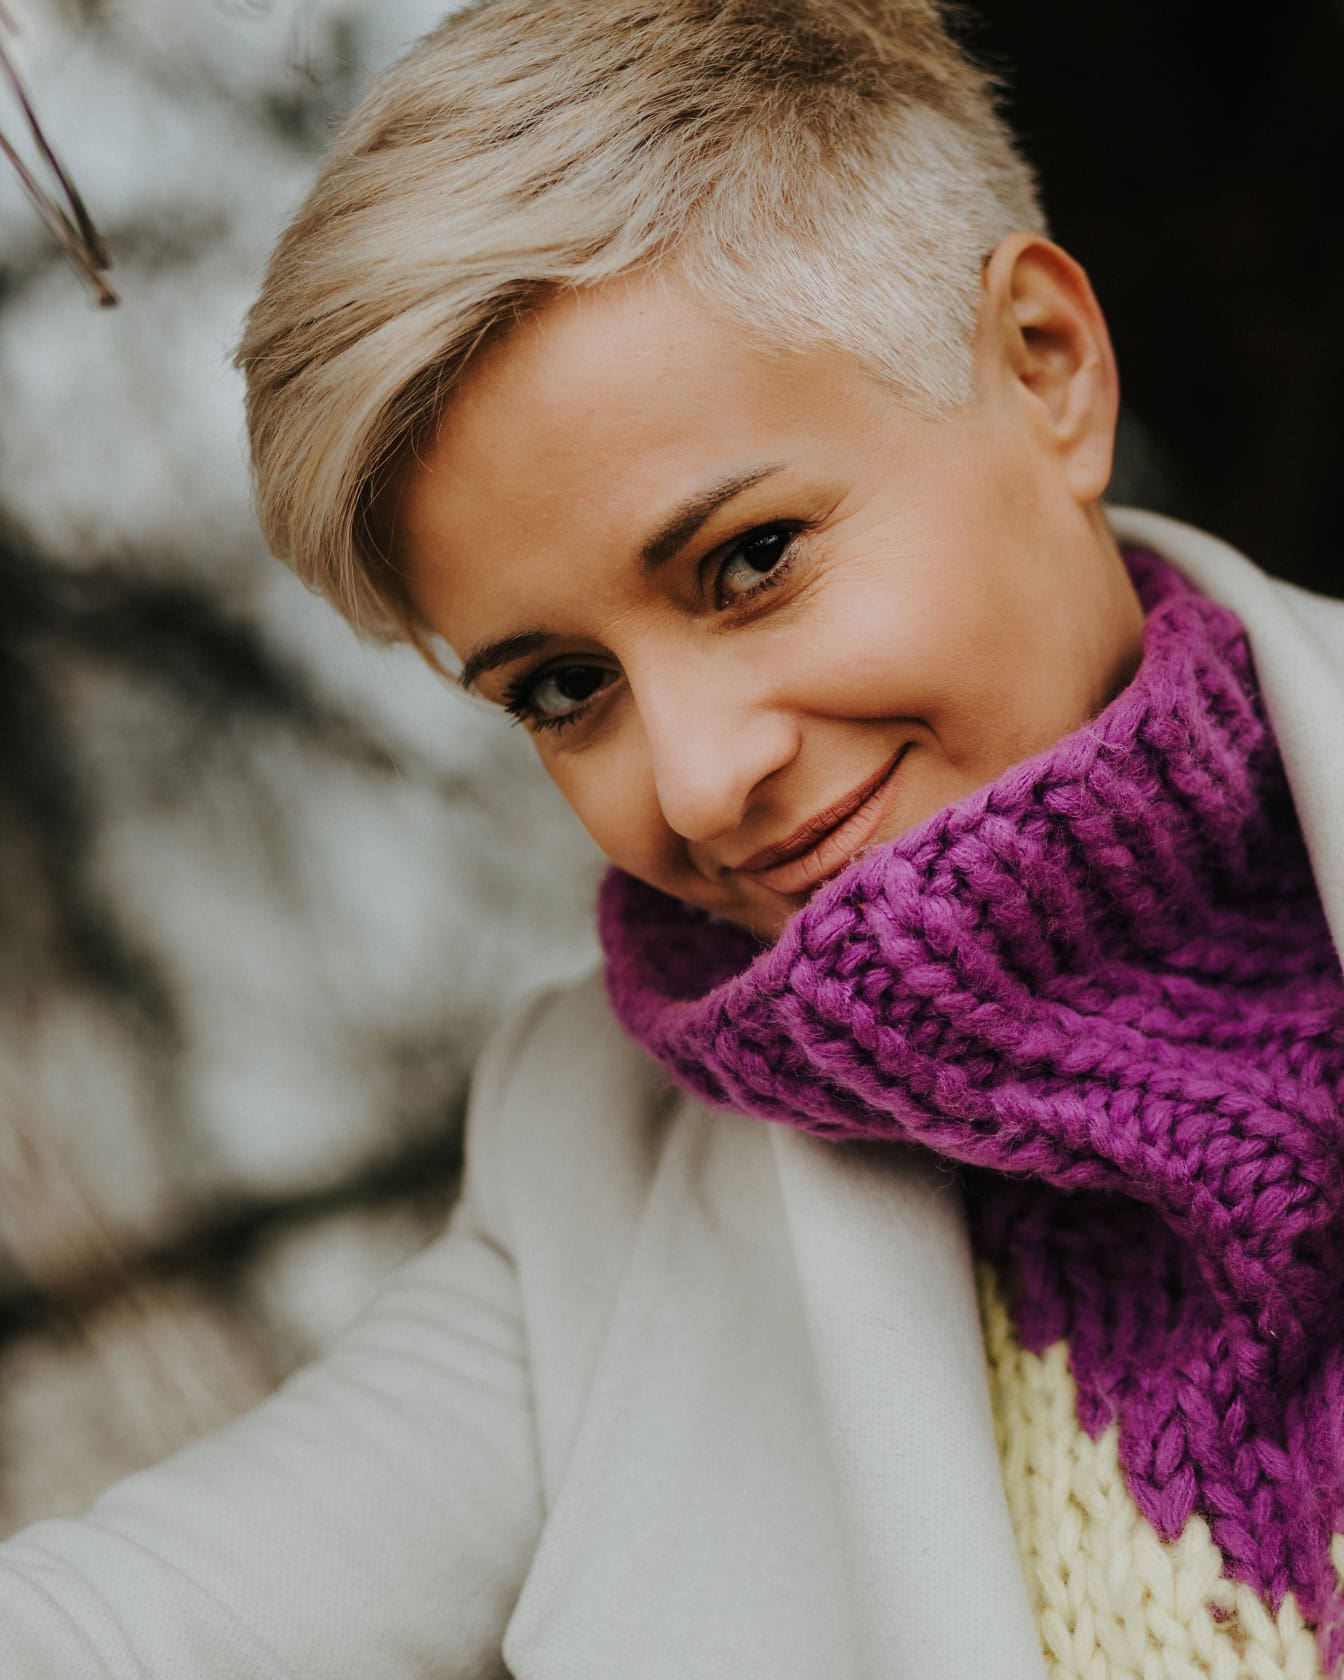 Portrait of a blonde with short hair wearing purple hand-woven sweater under a white coat